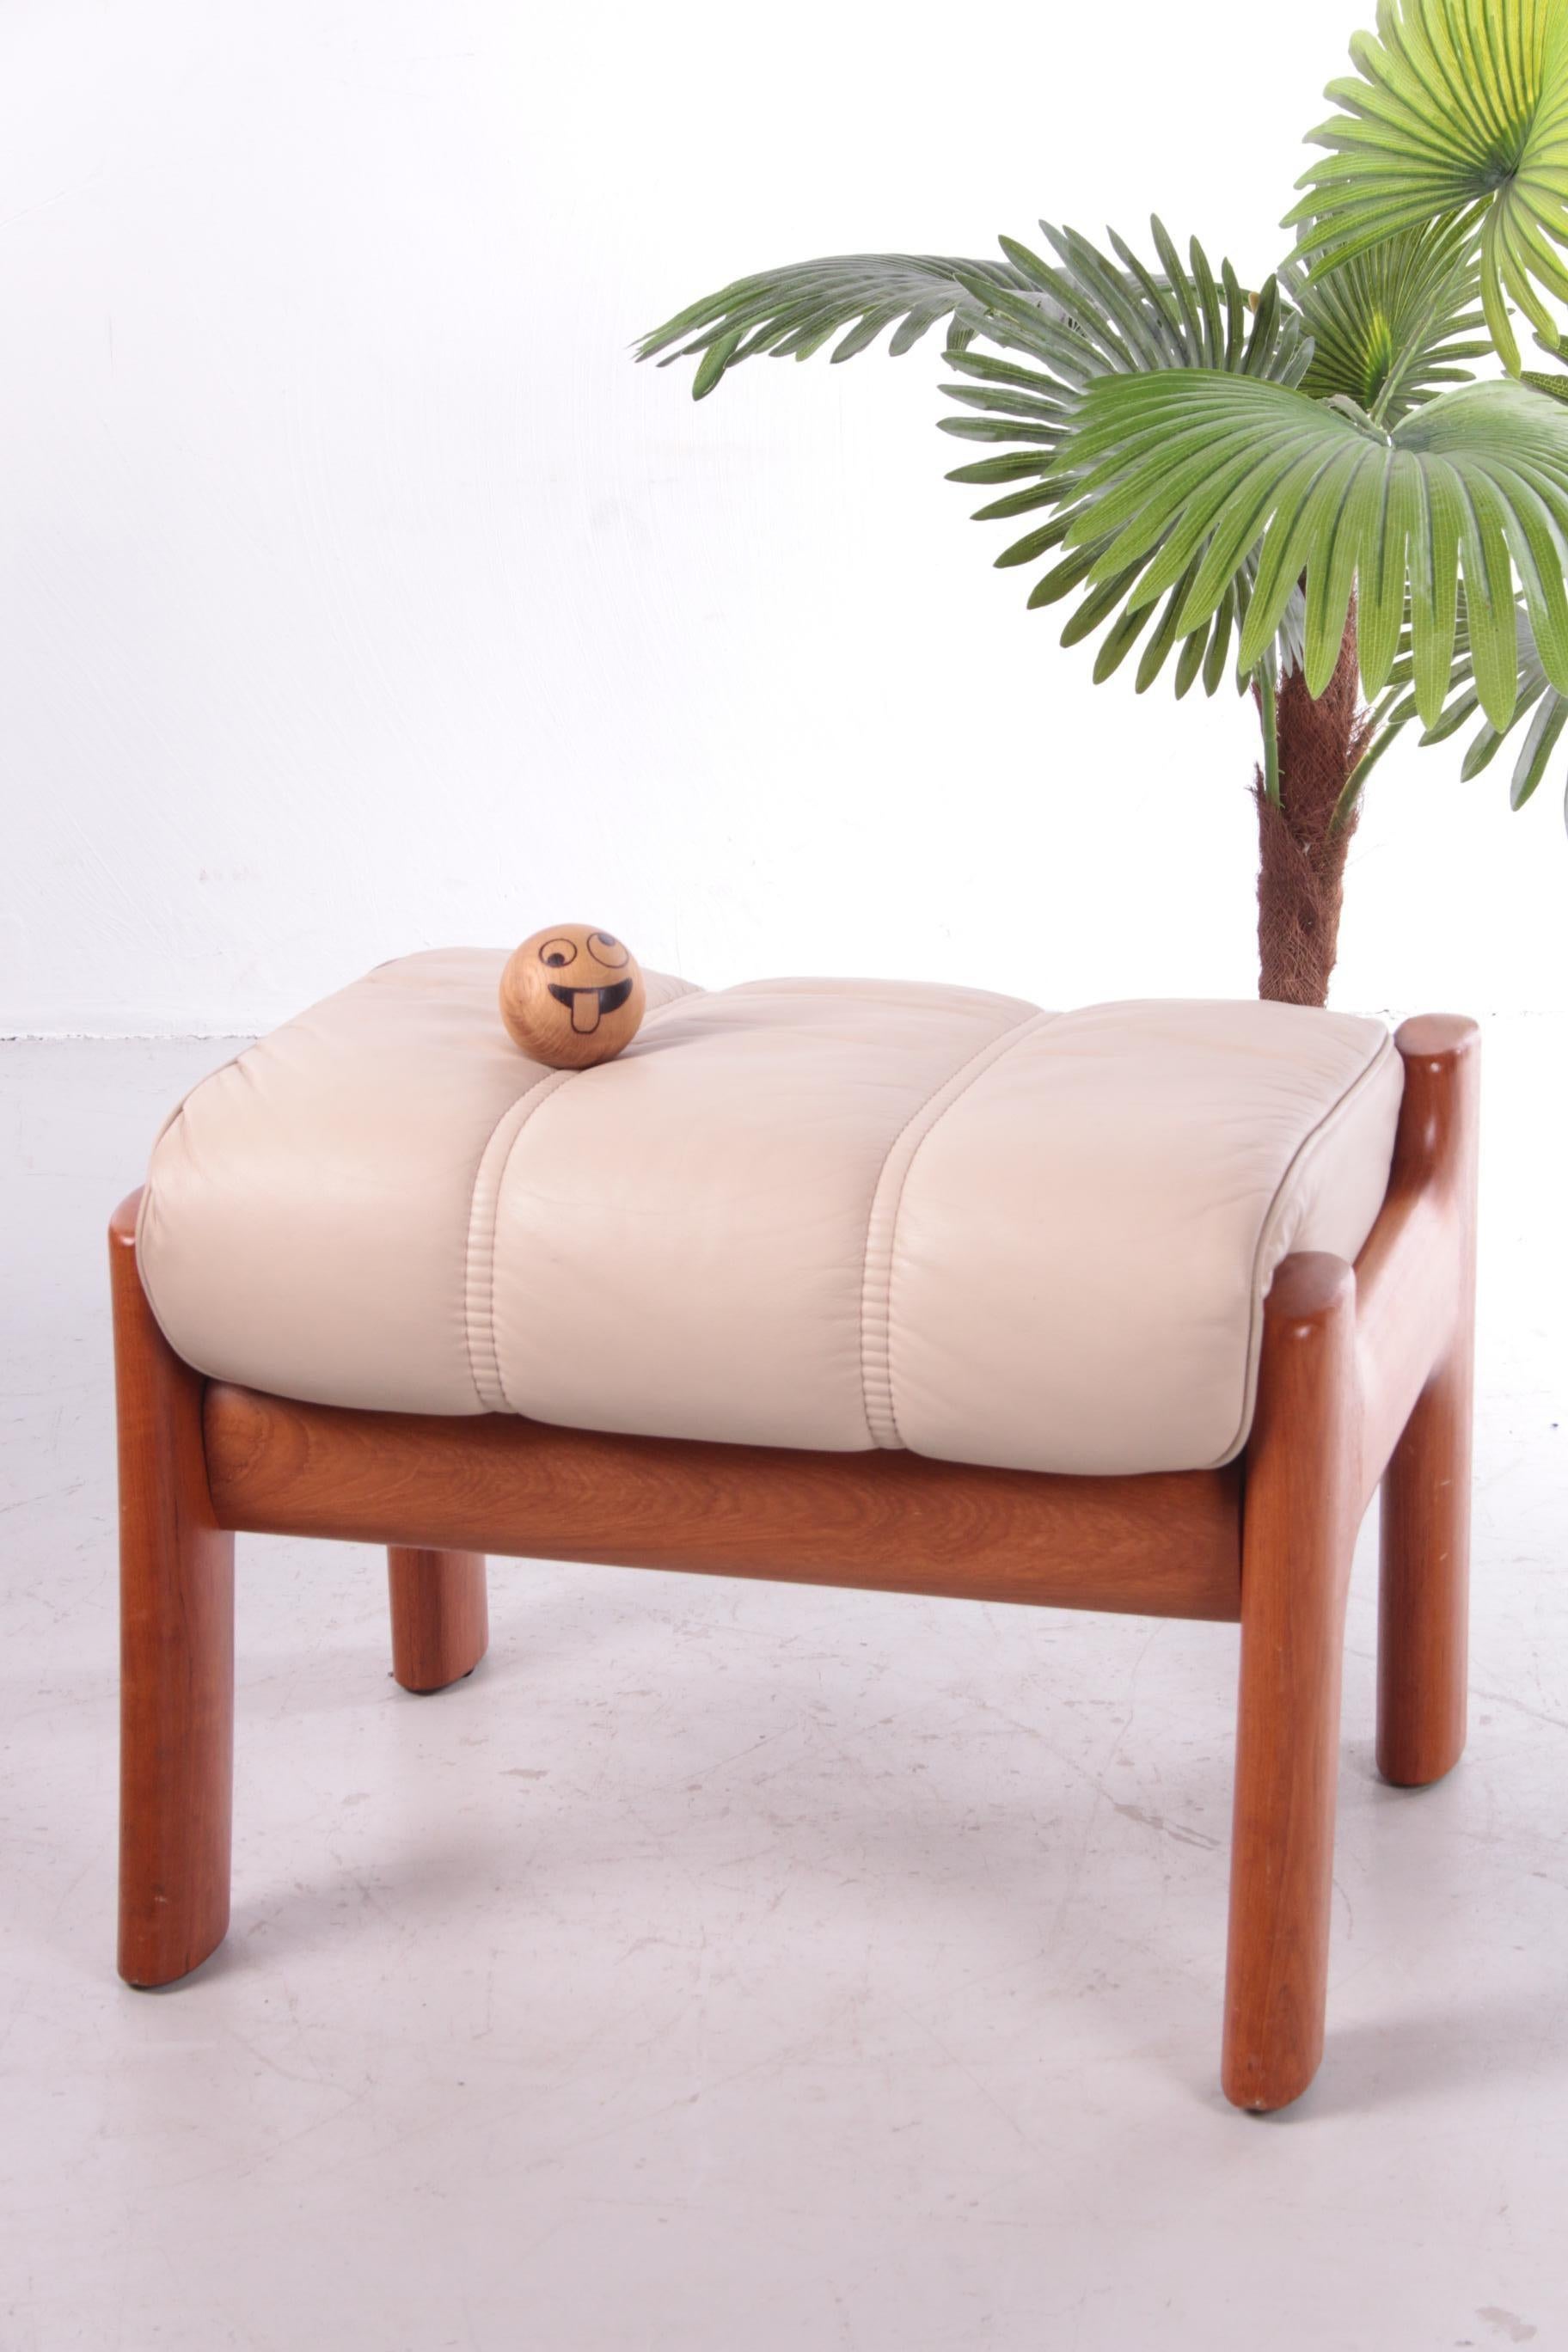 Vintage footrest made of teak with leather 1970

This is a very solid footstool with a leather cushion.

The base is made of teak wood.

You can lift the cushion and then you have a compartment to store a book.